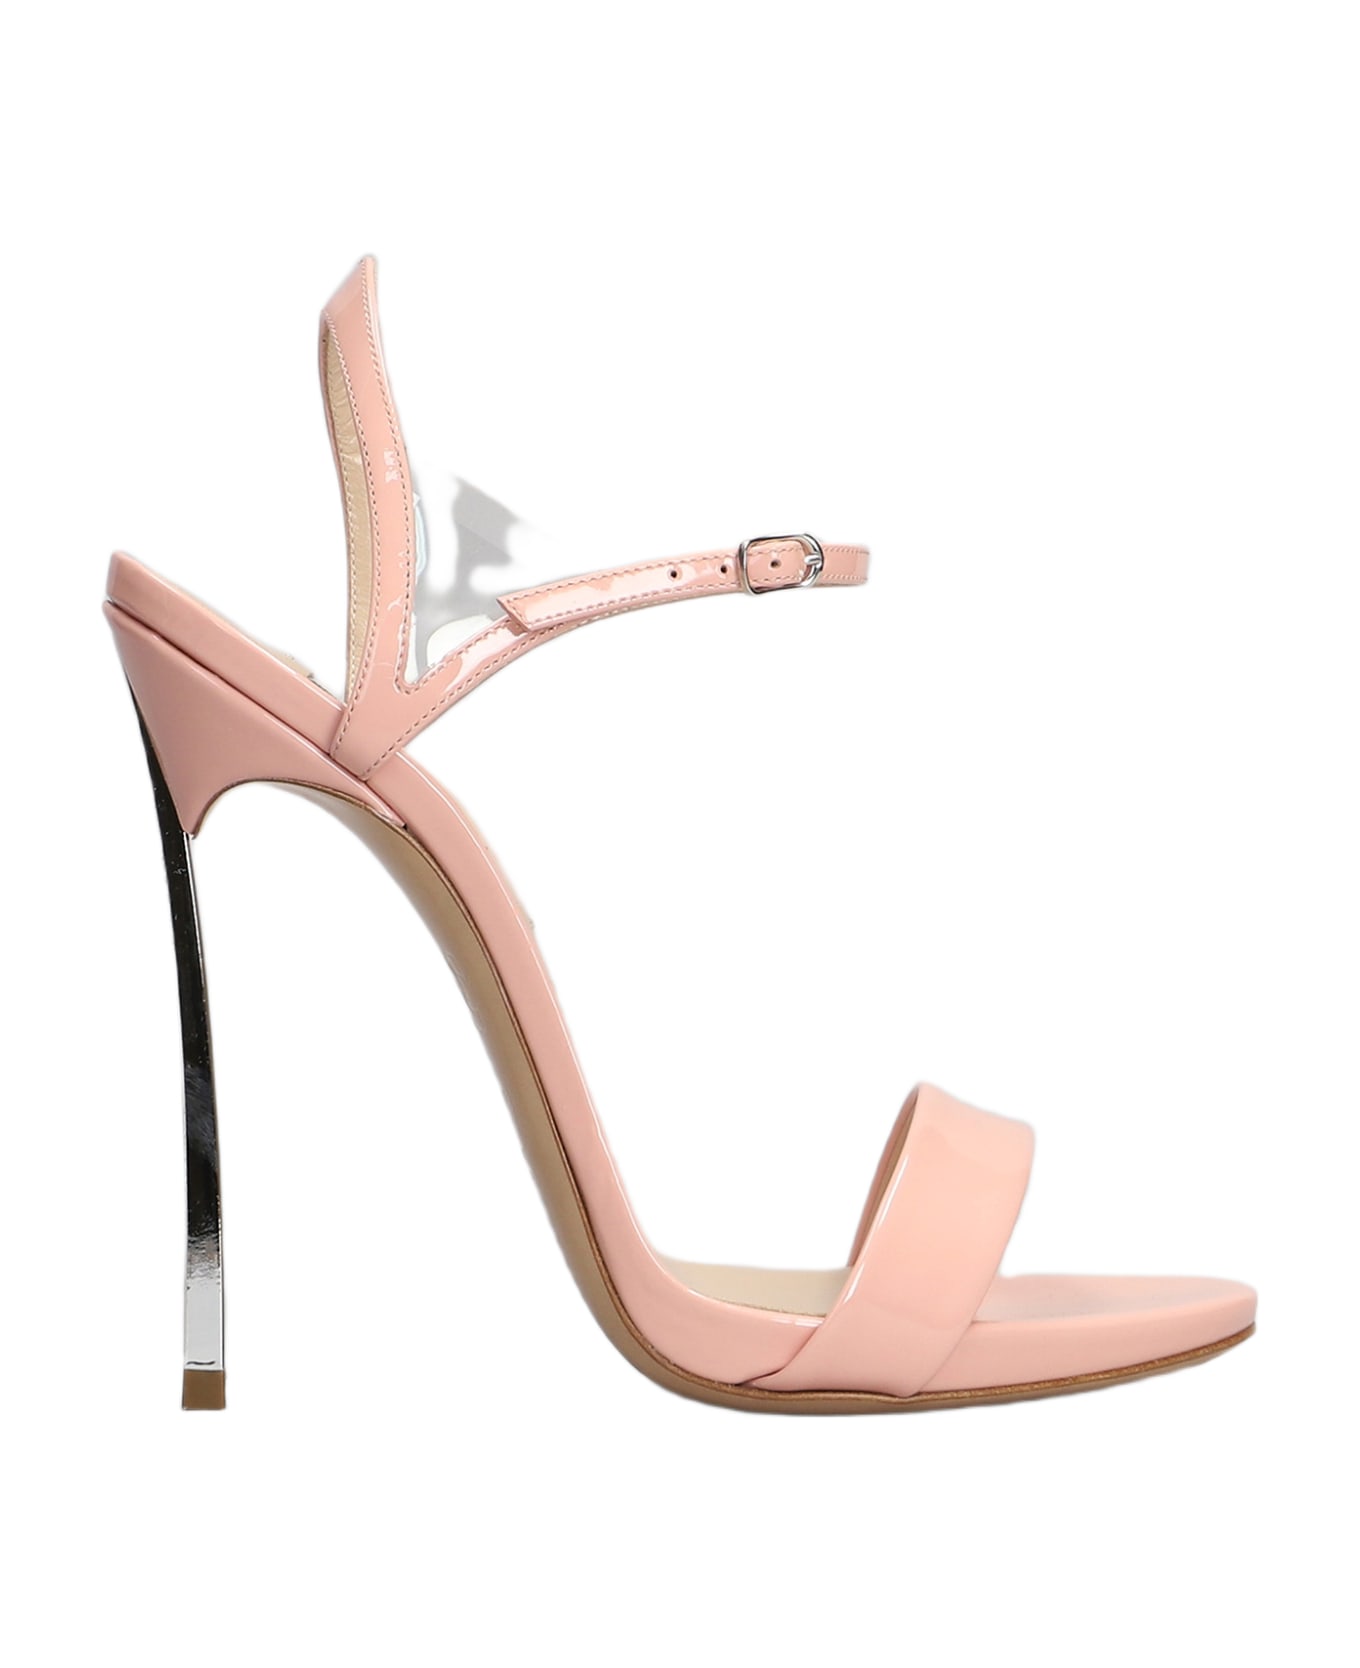 Casadei Sandals In Rose-pink Patent Leather - rose-pink